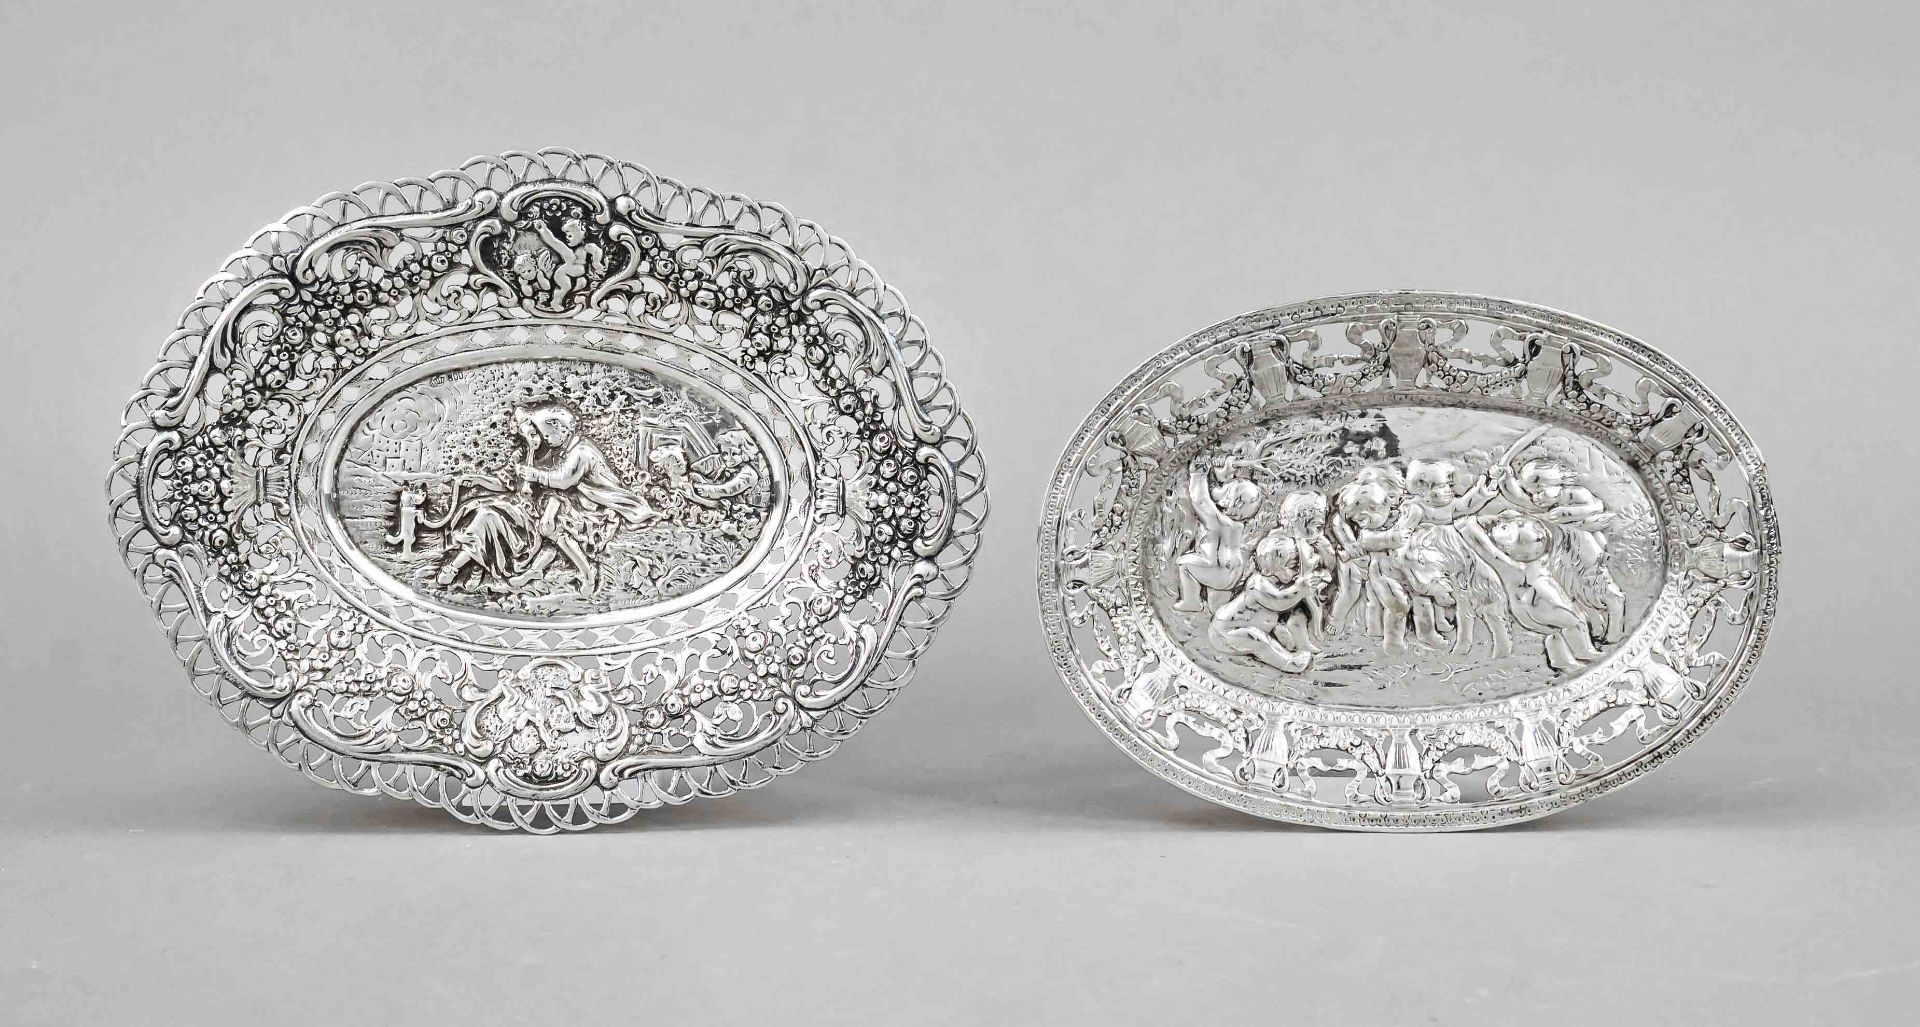 Two oval bowls, 20th century, 1x German, silver 800/000, each with pierced rim, mirror with